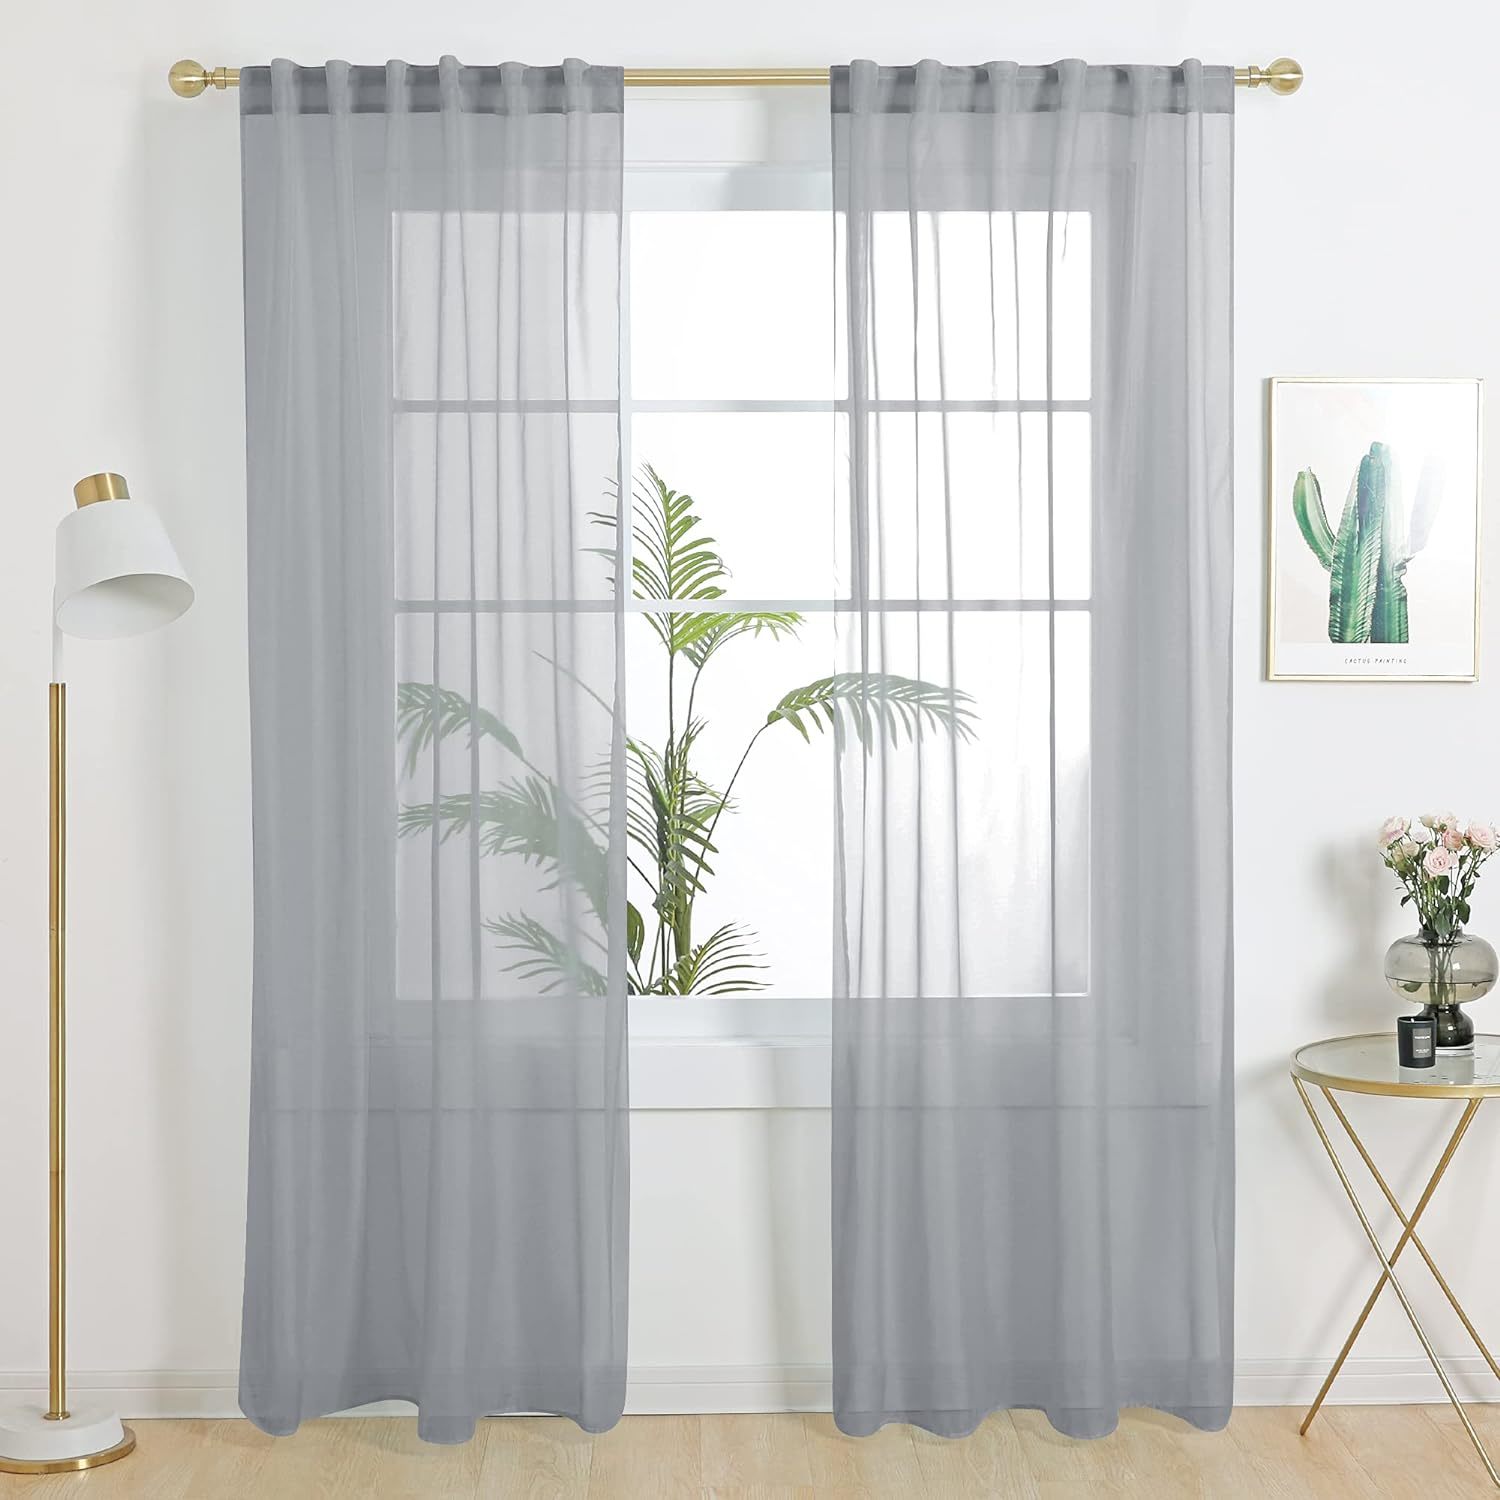 Grey Deconovo Sheer Curtains, Voile Sheer Curtains, Sheer Curtain, 2 Panels. - $32.97